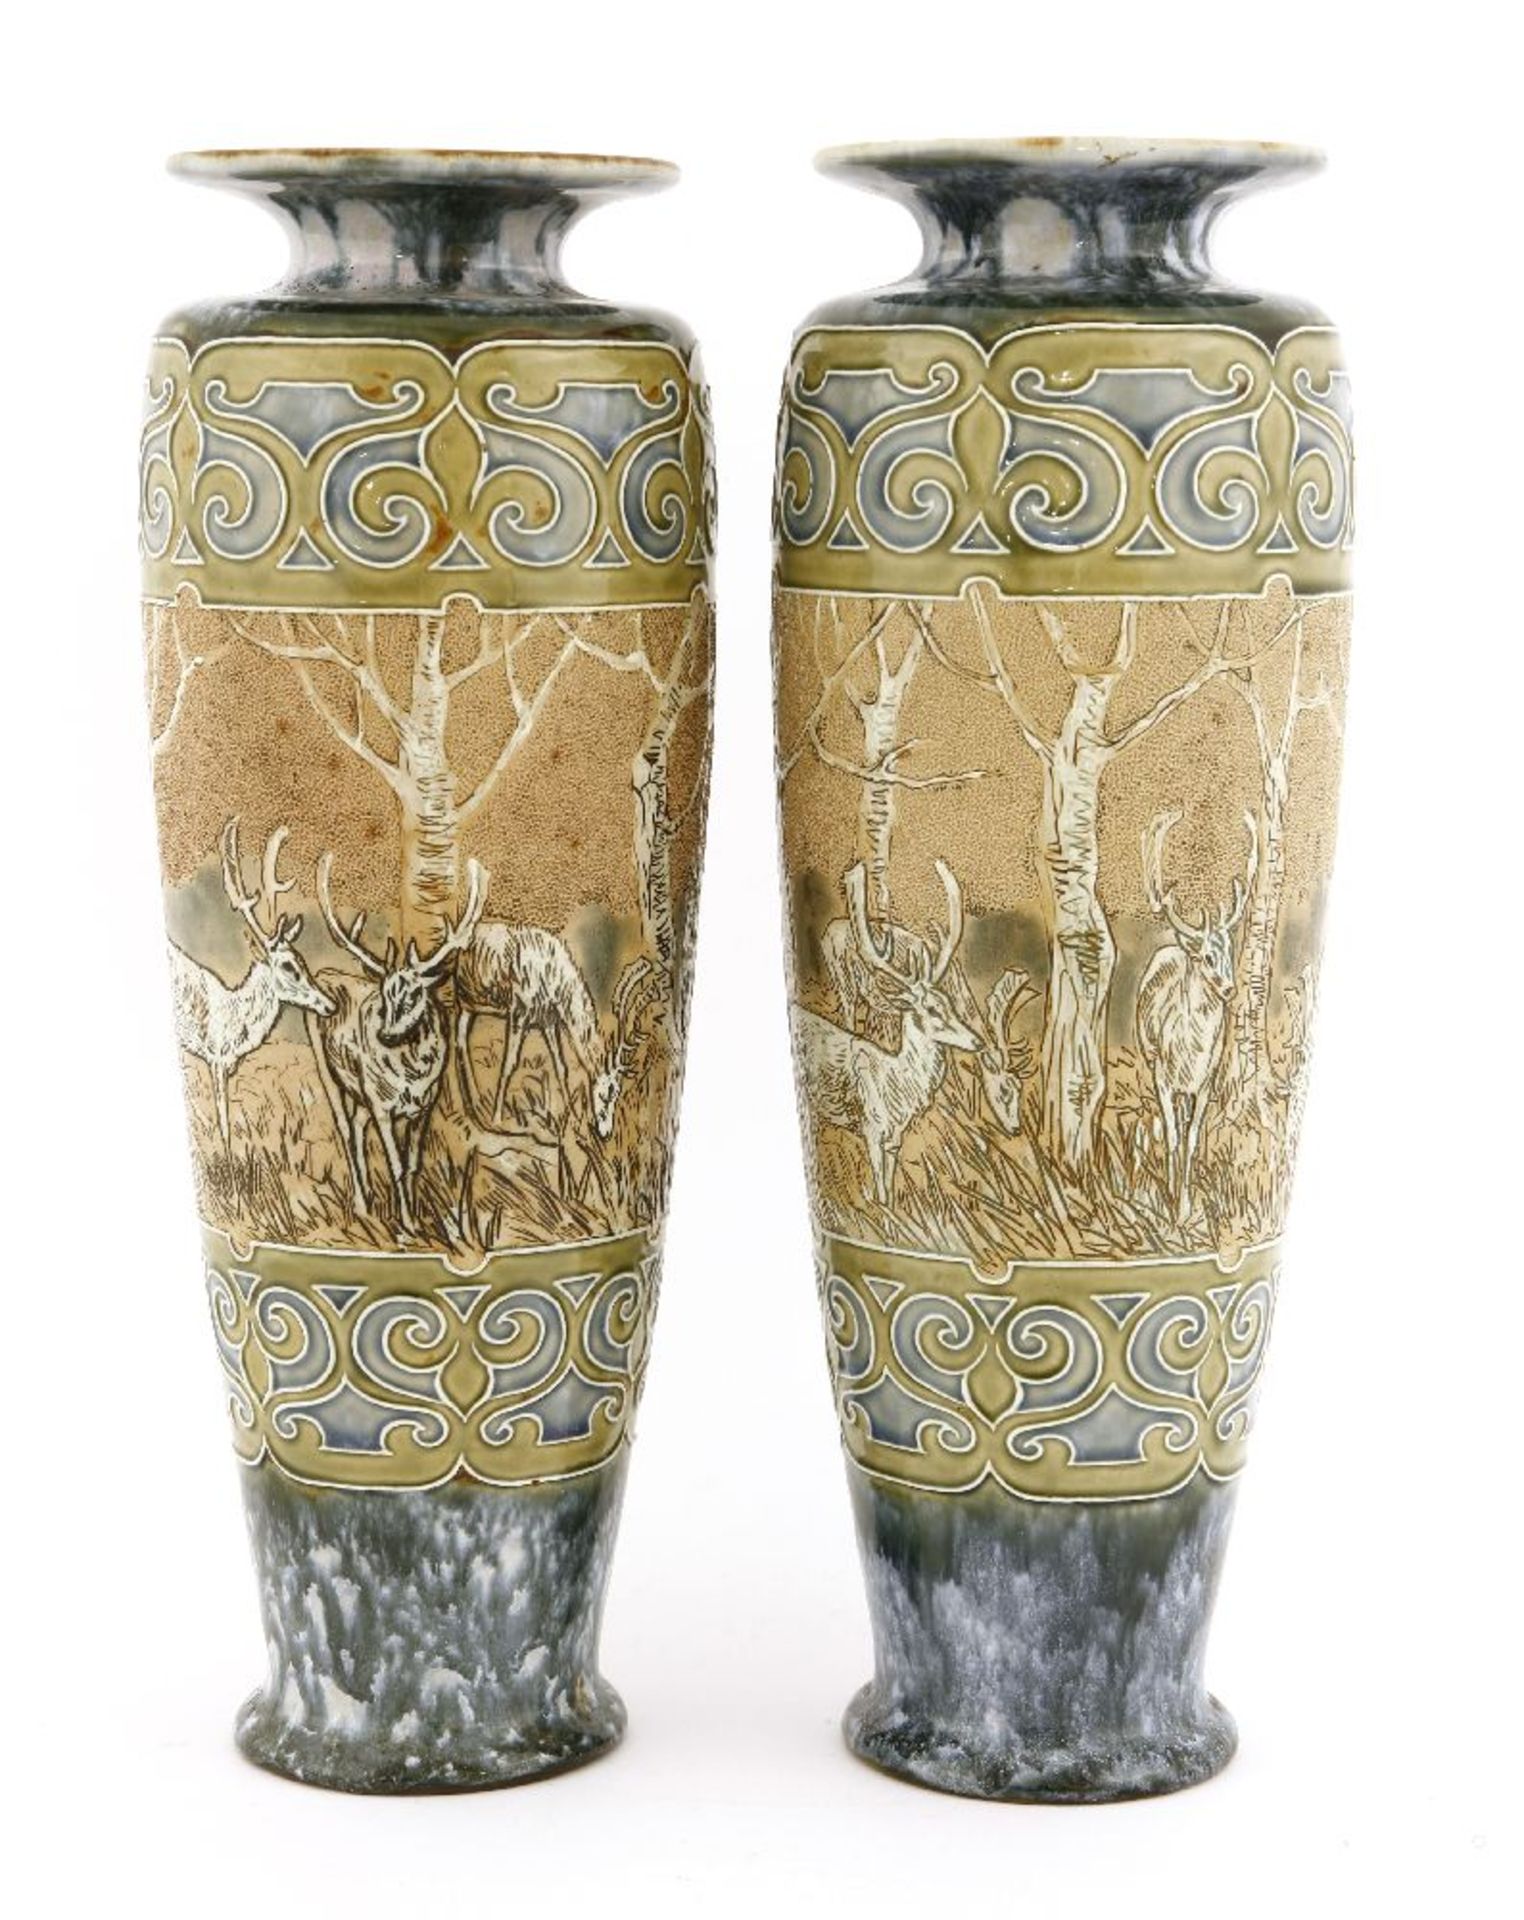 A pair of Royal Doulton stoneware vases,by Hannah Barlow, each incised with a band of deer,